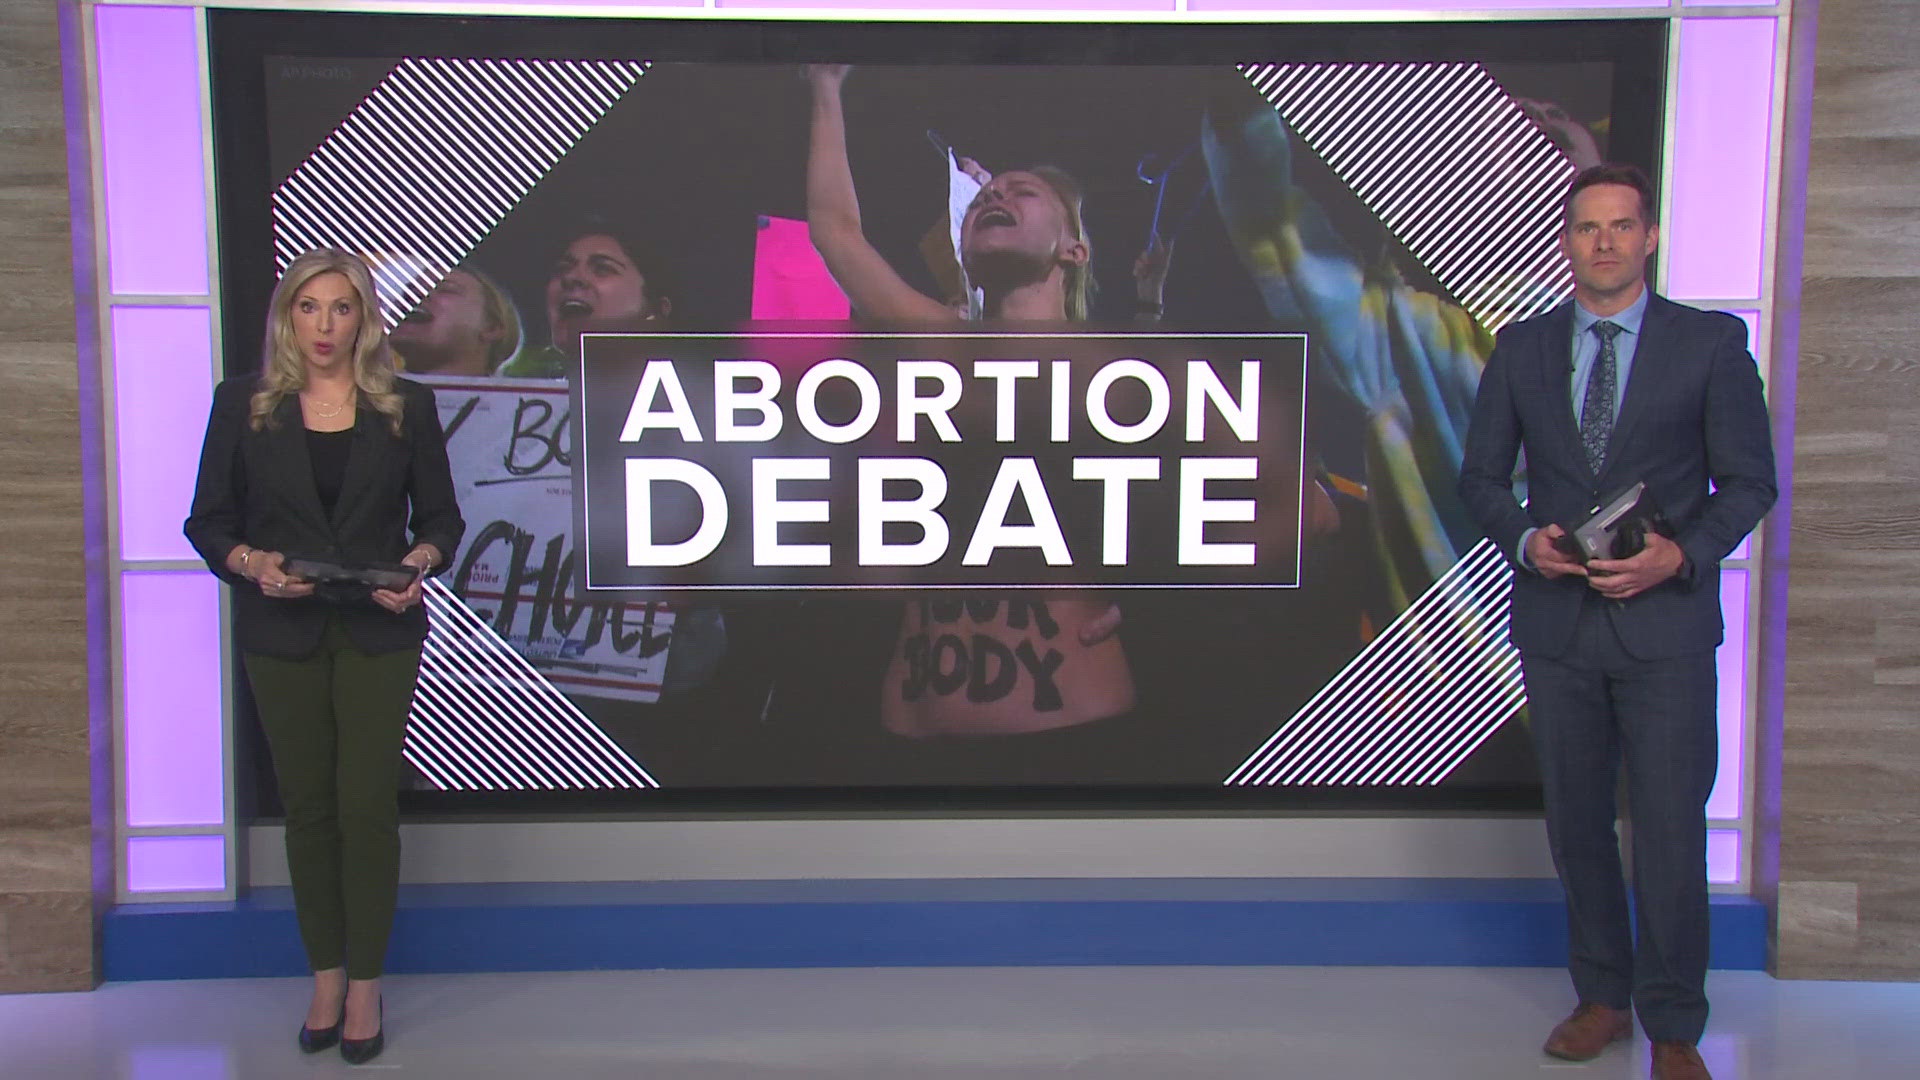 An update on how leaders are feeling about Idaho's abortion laws after SCOTUS decision